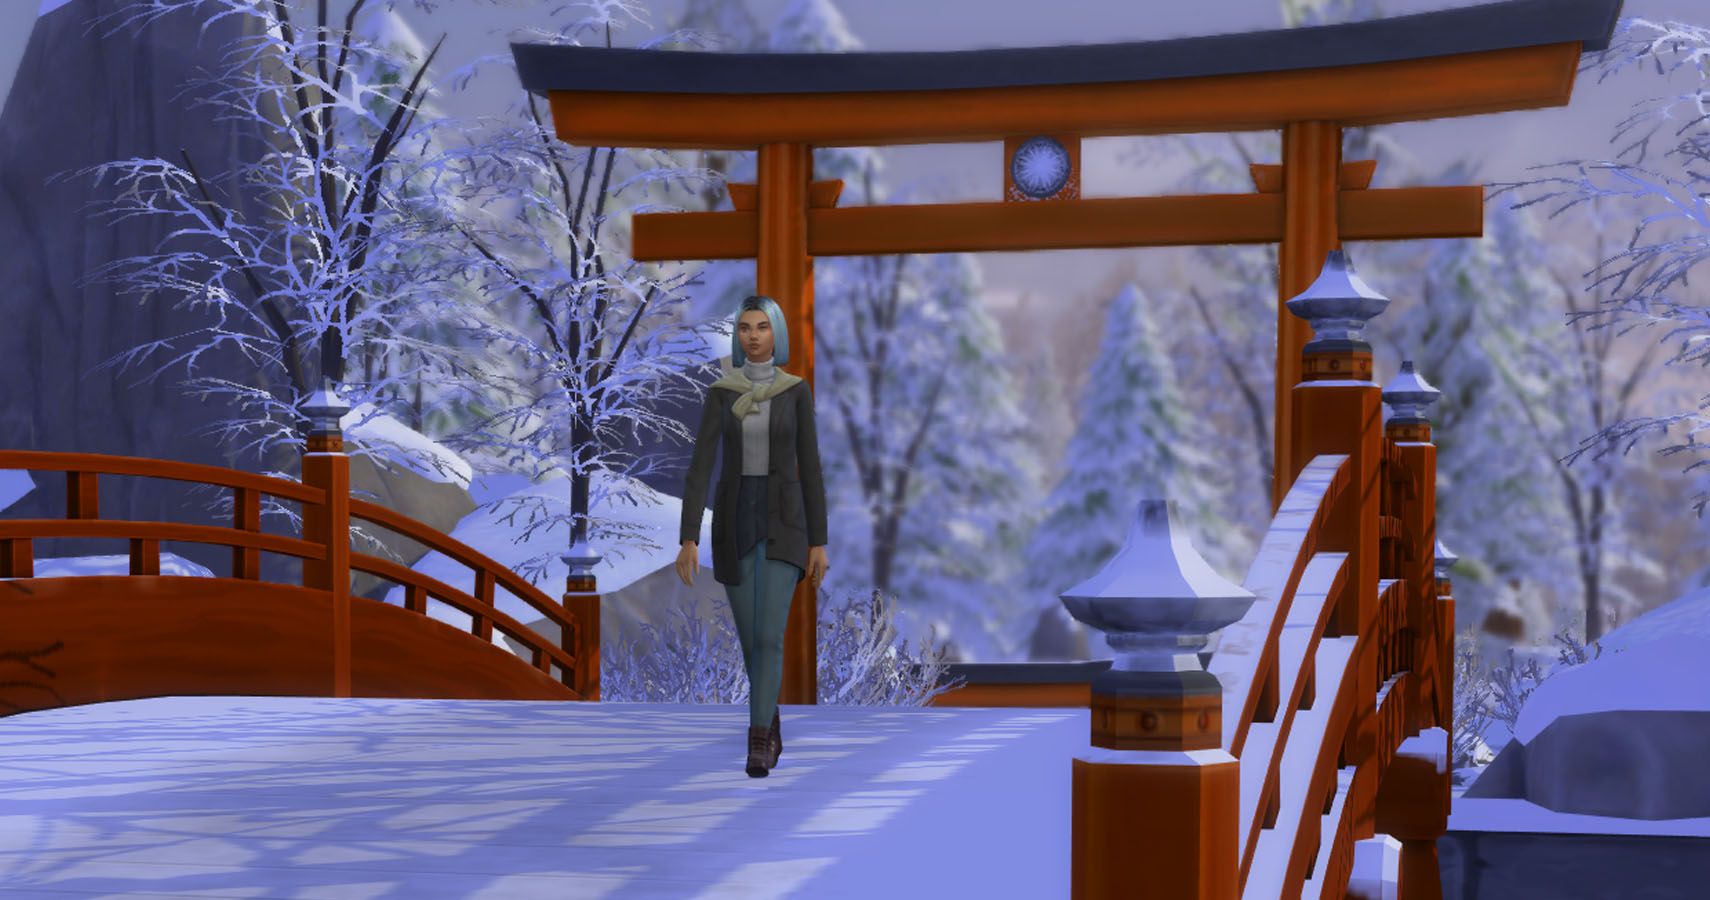 Sims strolling over a bridge